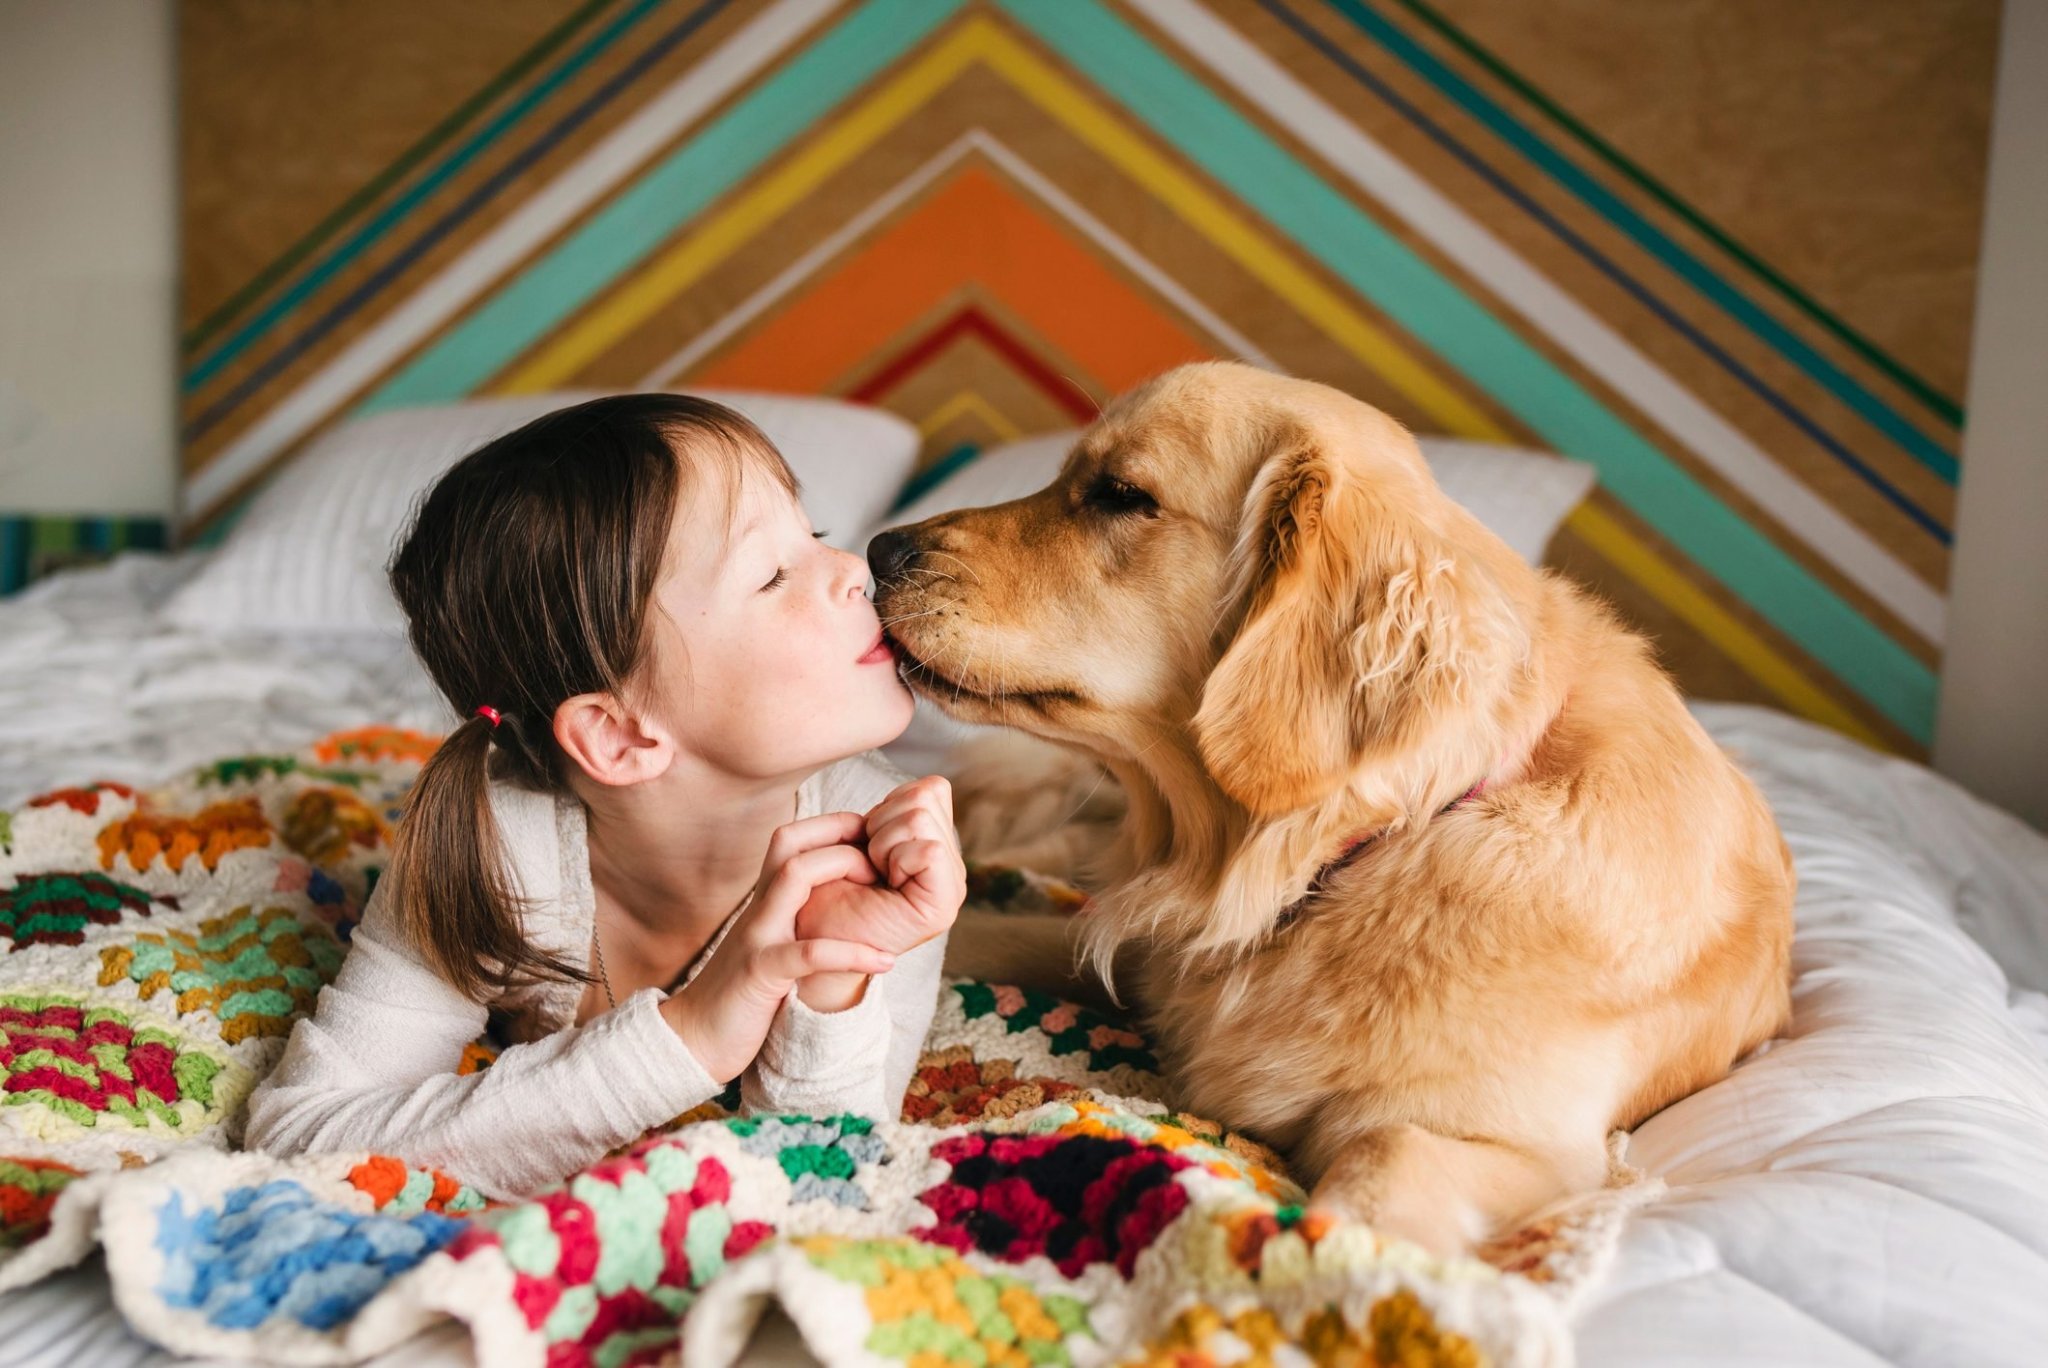 11 Most Affectionate Dog Breeds That Love to Cuddle